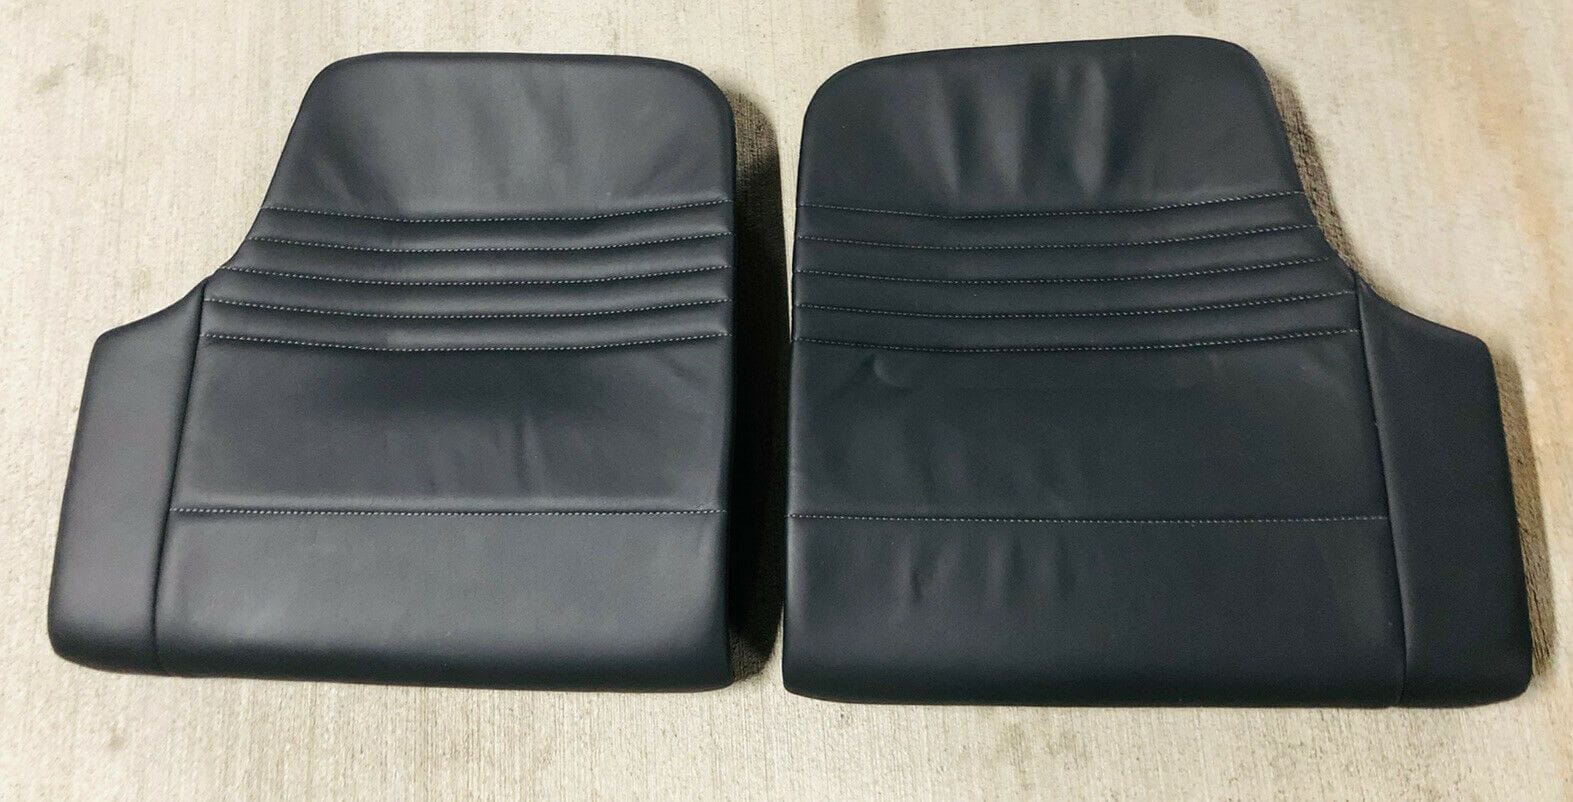 Interior/Upholstery - 996 Black Rear Seat Bottoms - Excellent shape - Used - 1998 to 2005 Porsche 911 - Rockville, MD 20852, United States